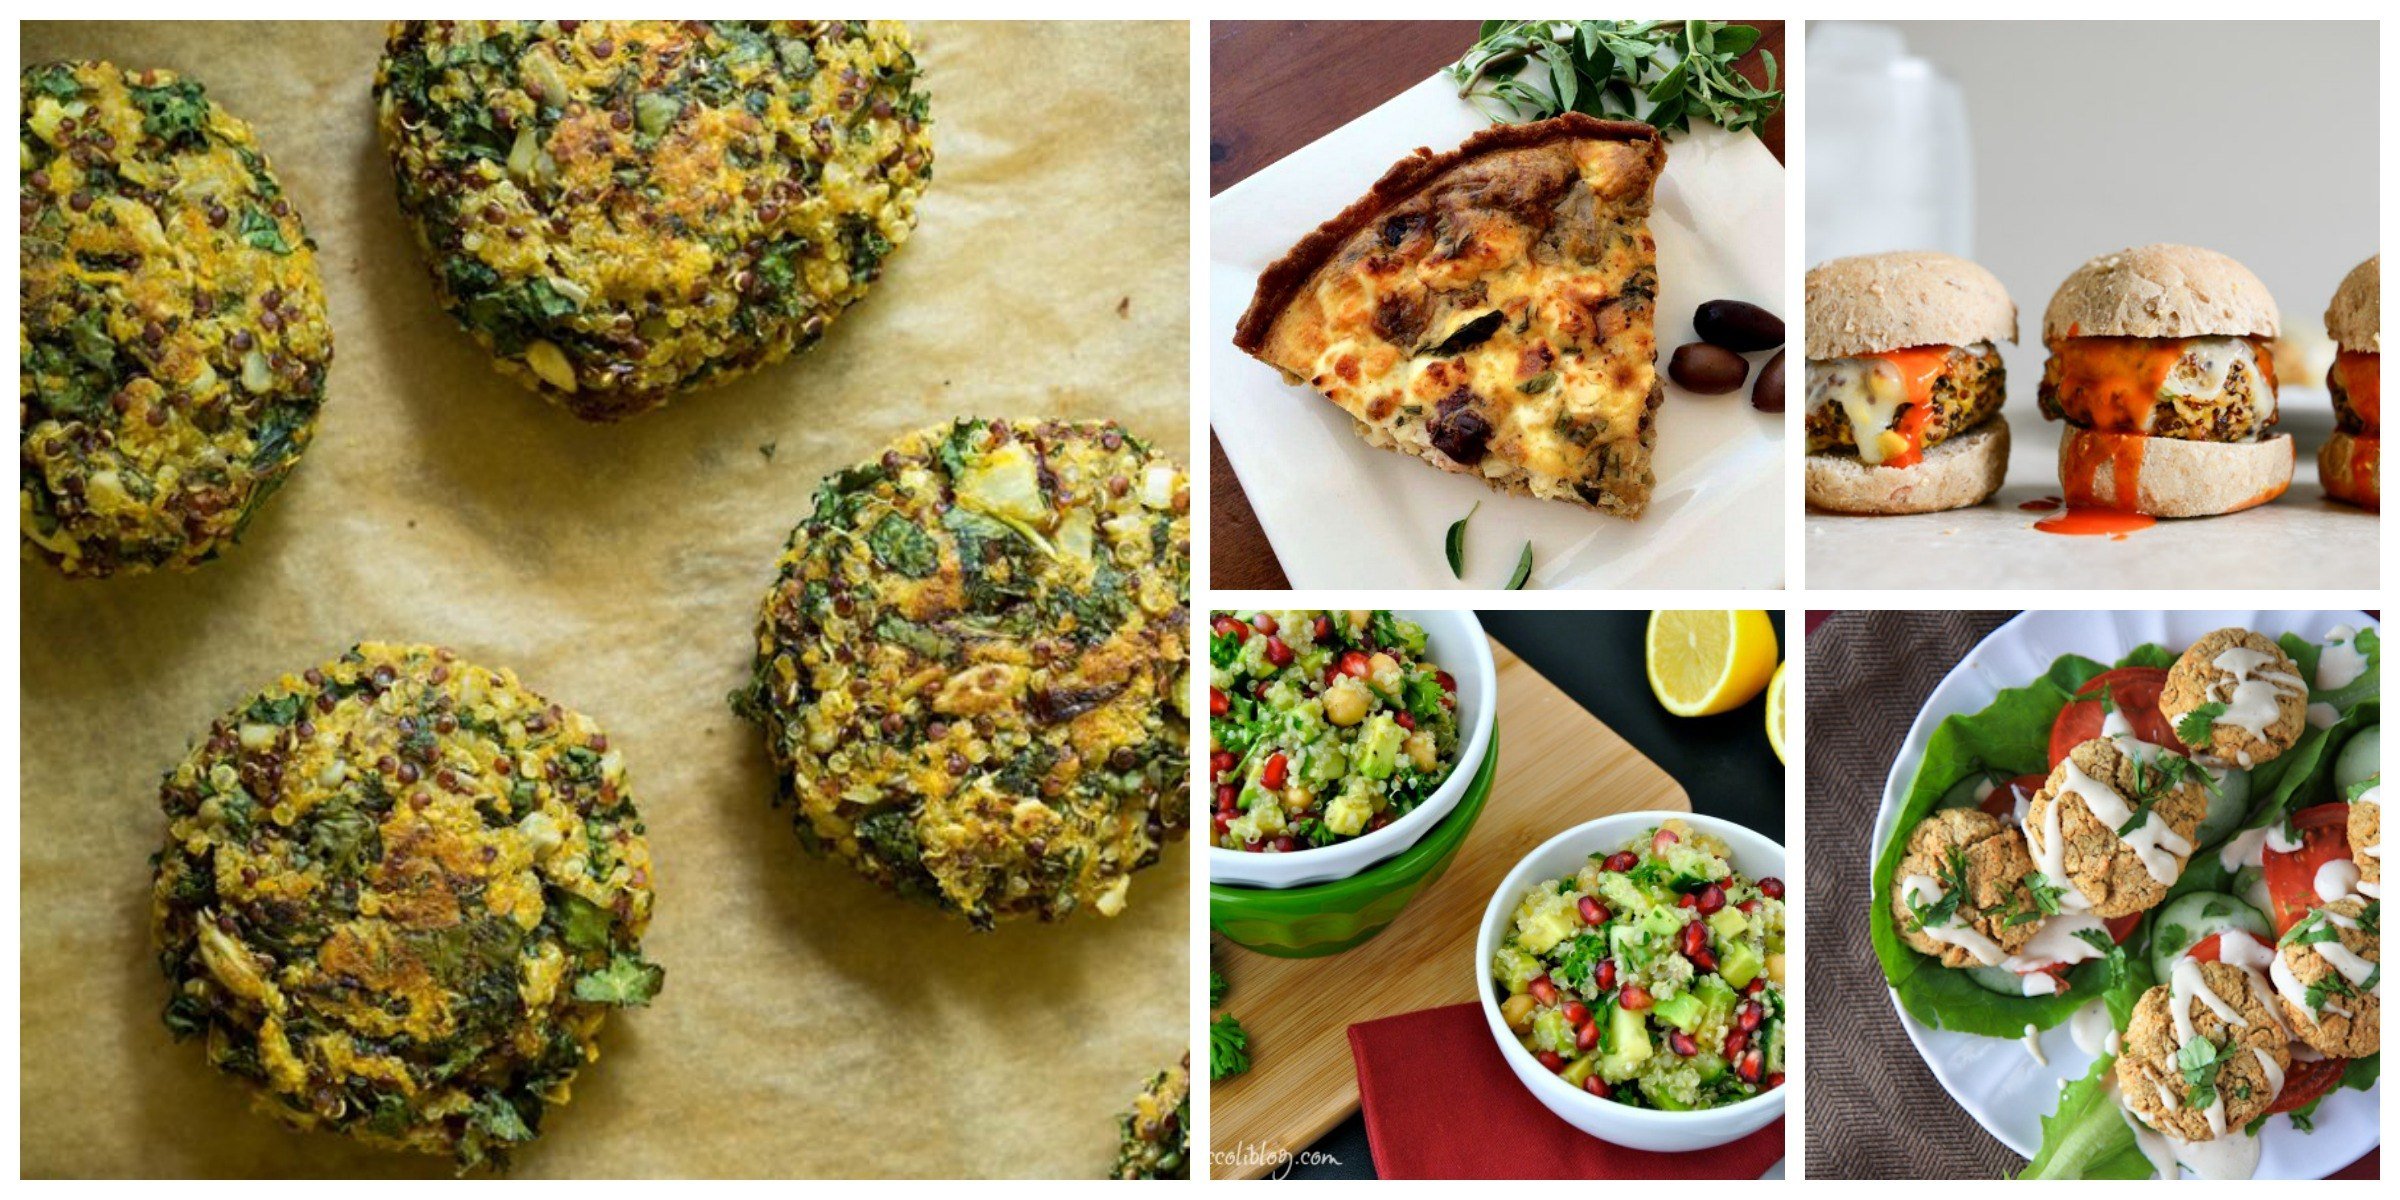 10 Amazing And Delicious Vegetables Recipes (Yes! Meat-Free!)